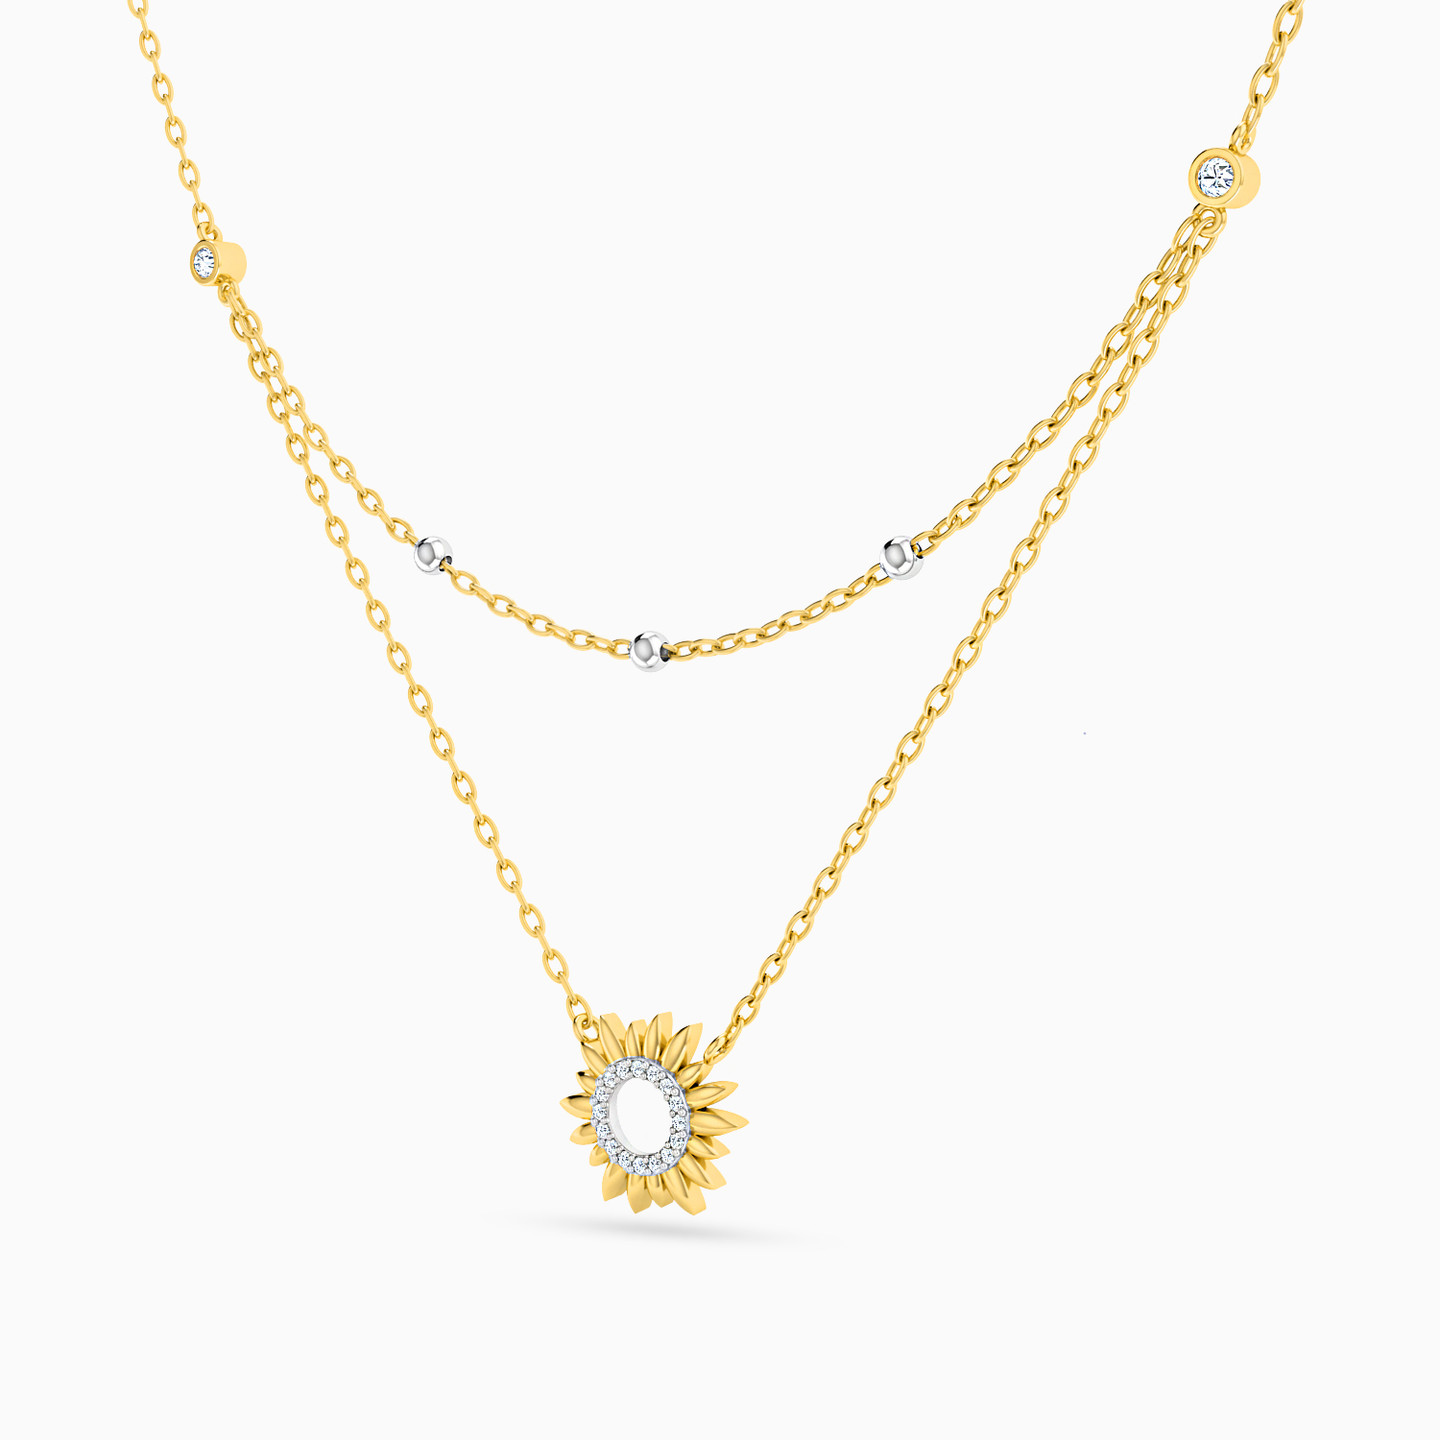 18K Gold Layered Necklace - 2